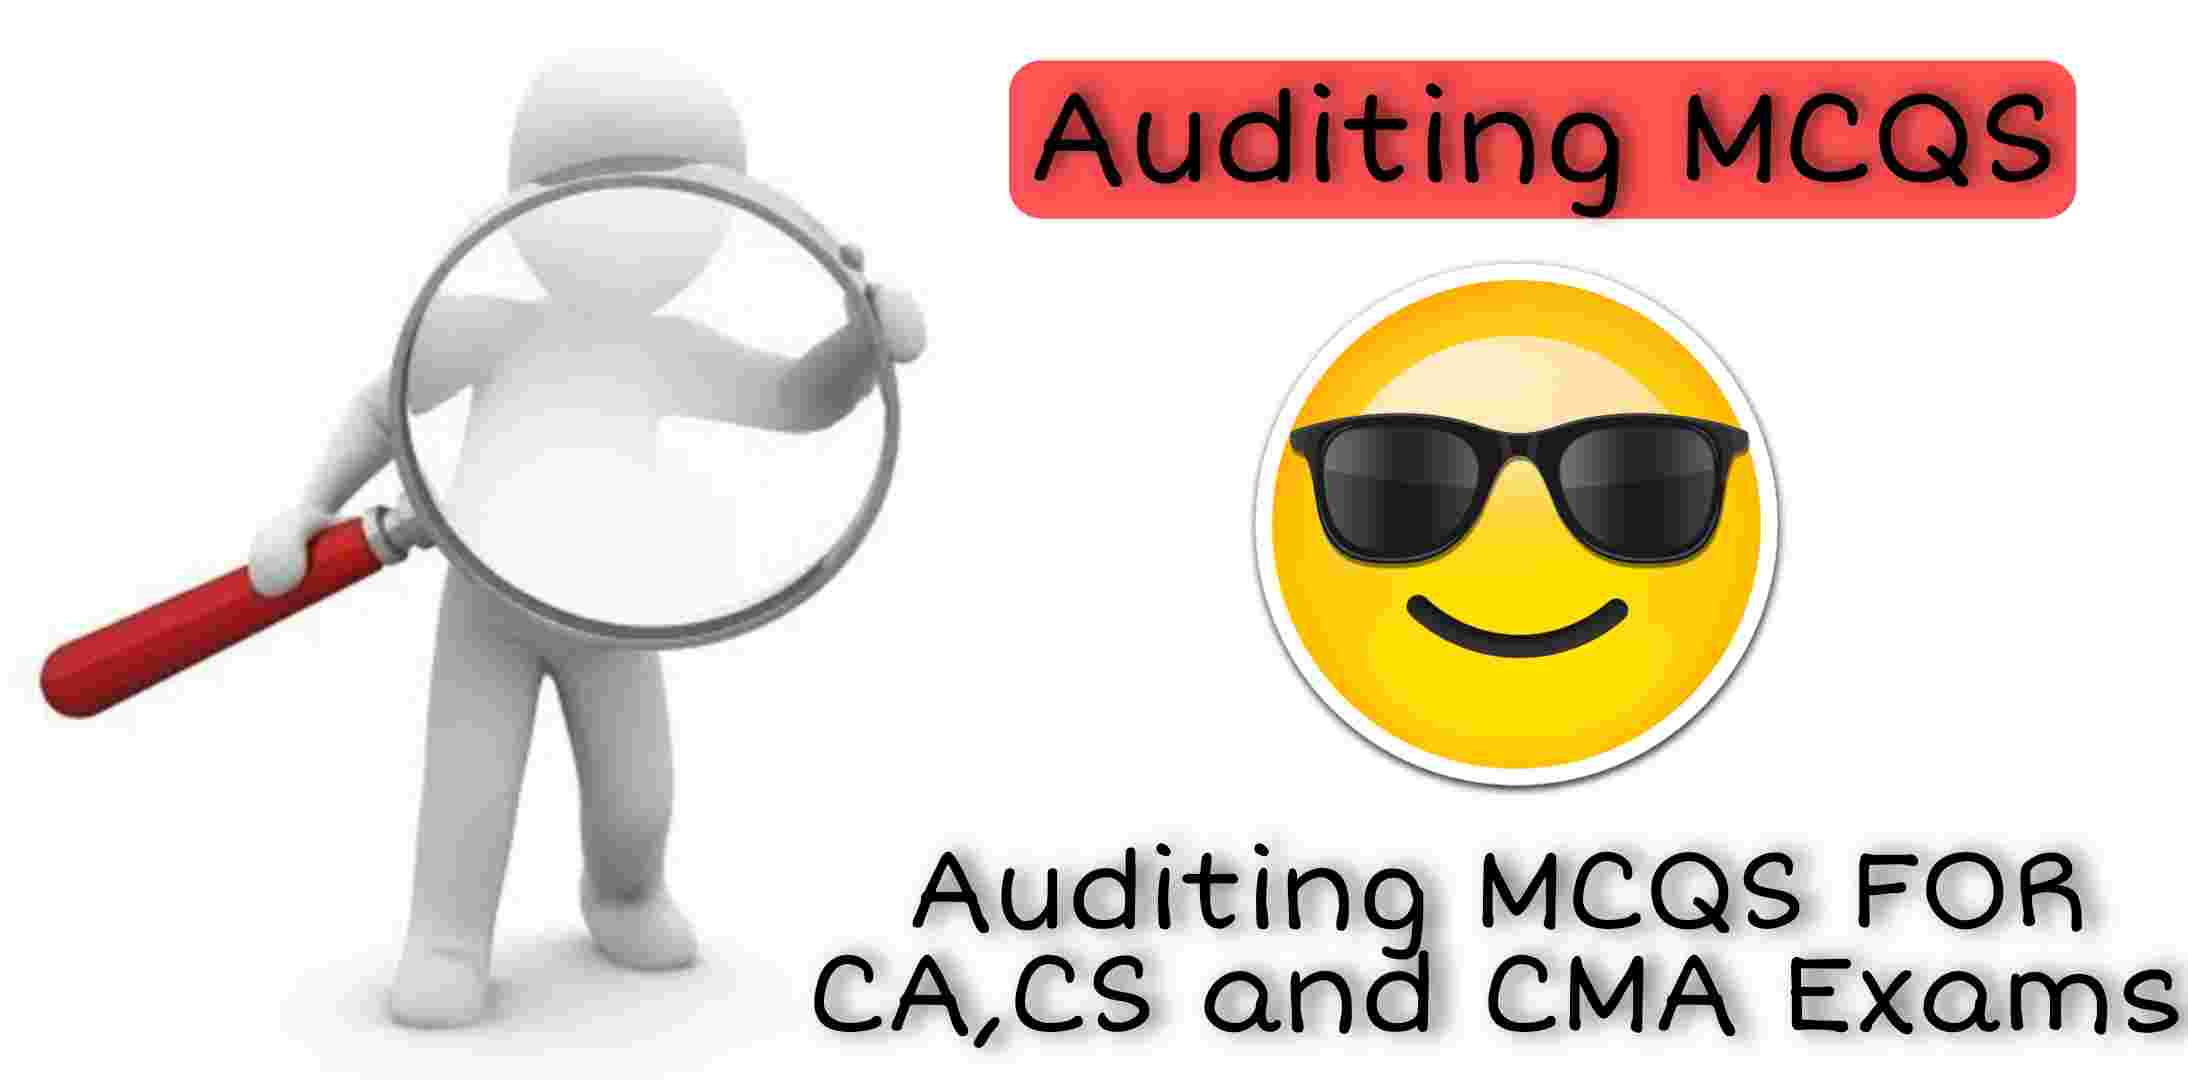 Auditing MCQS, Auditing Multiple Choice Questions And Answers, Auditing MCQs for UGC NET, Auditing MCQs for B.COM,